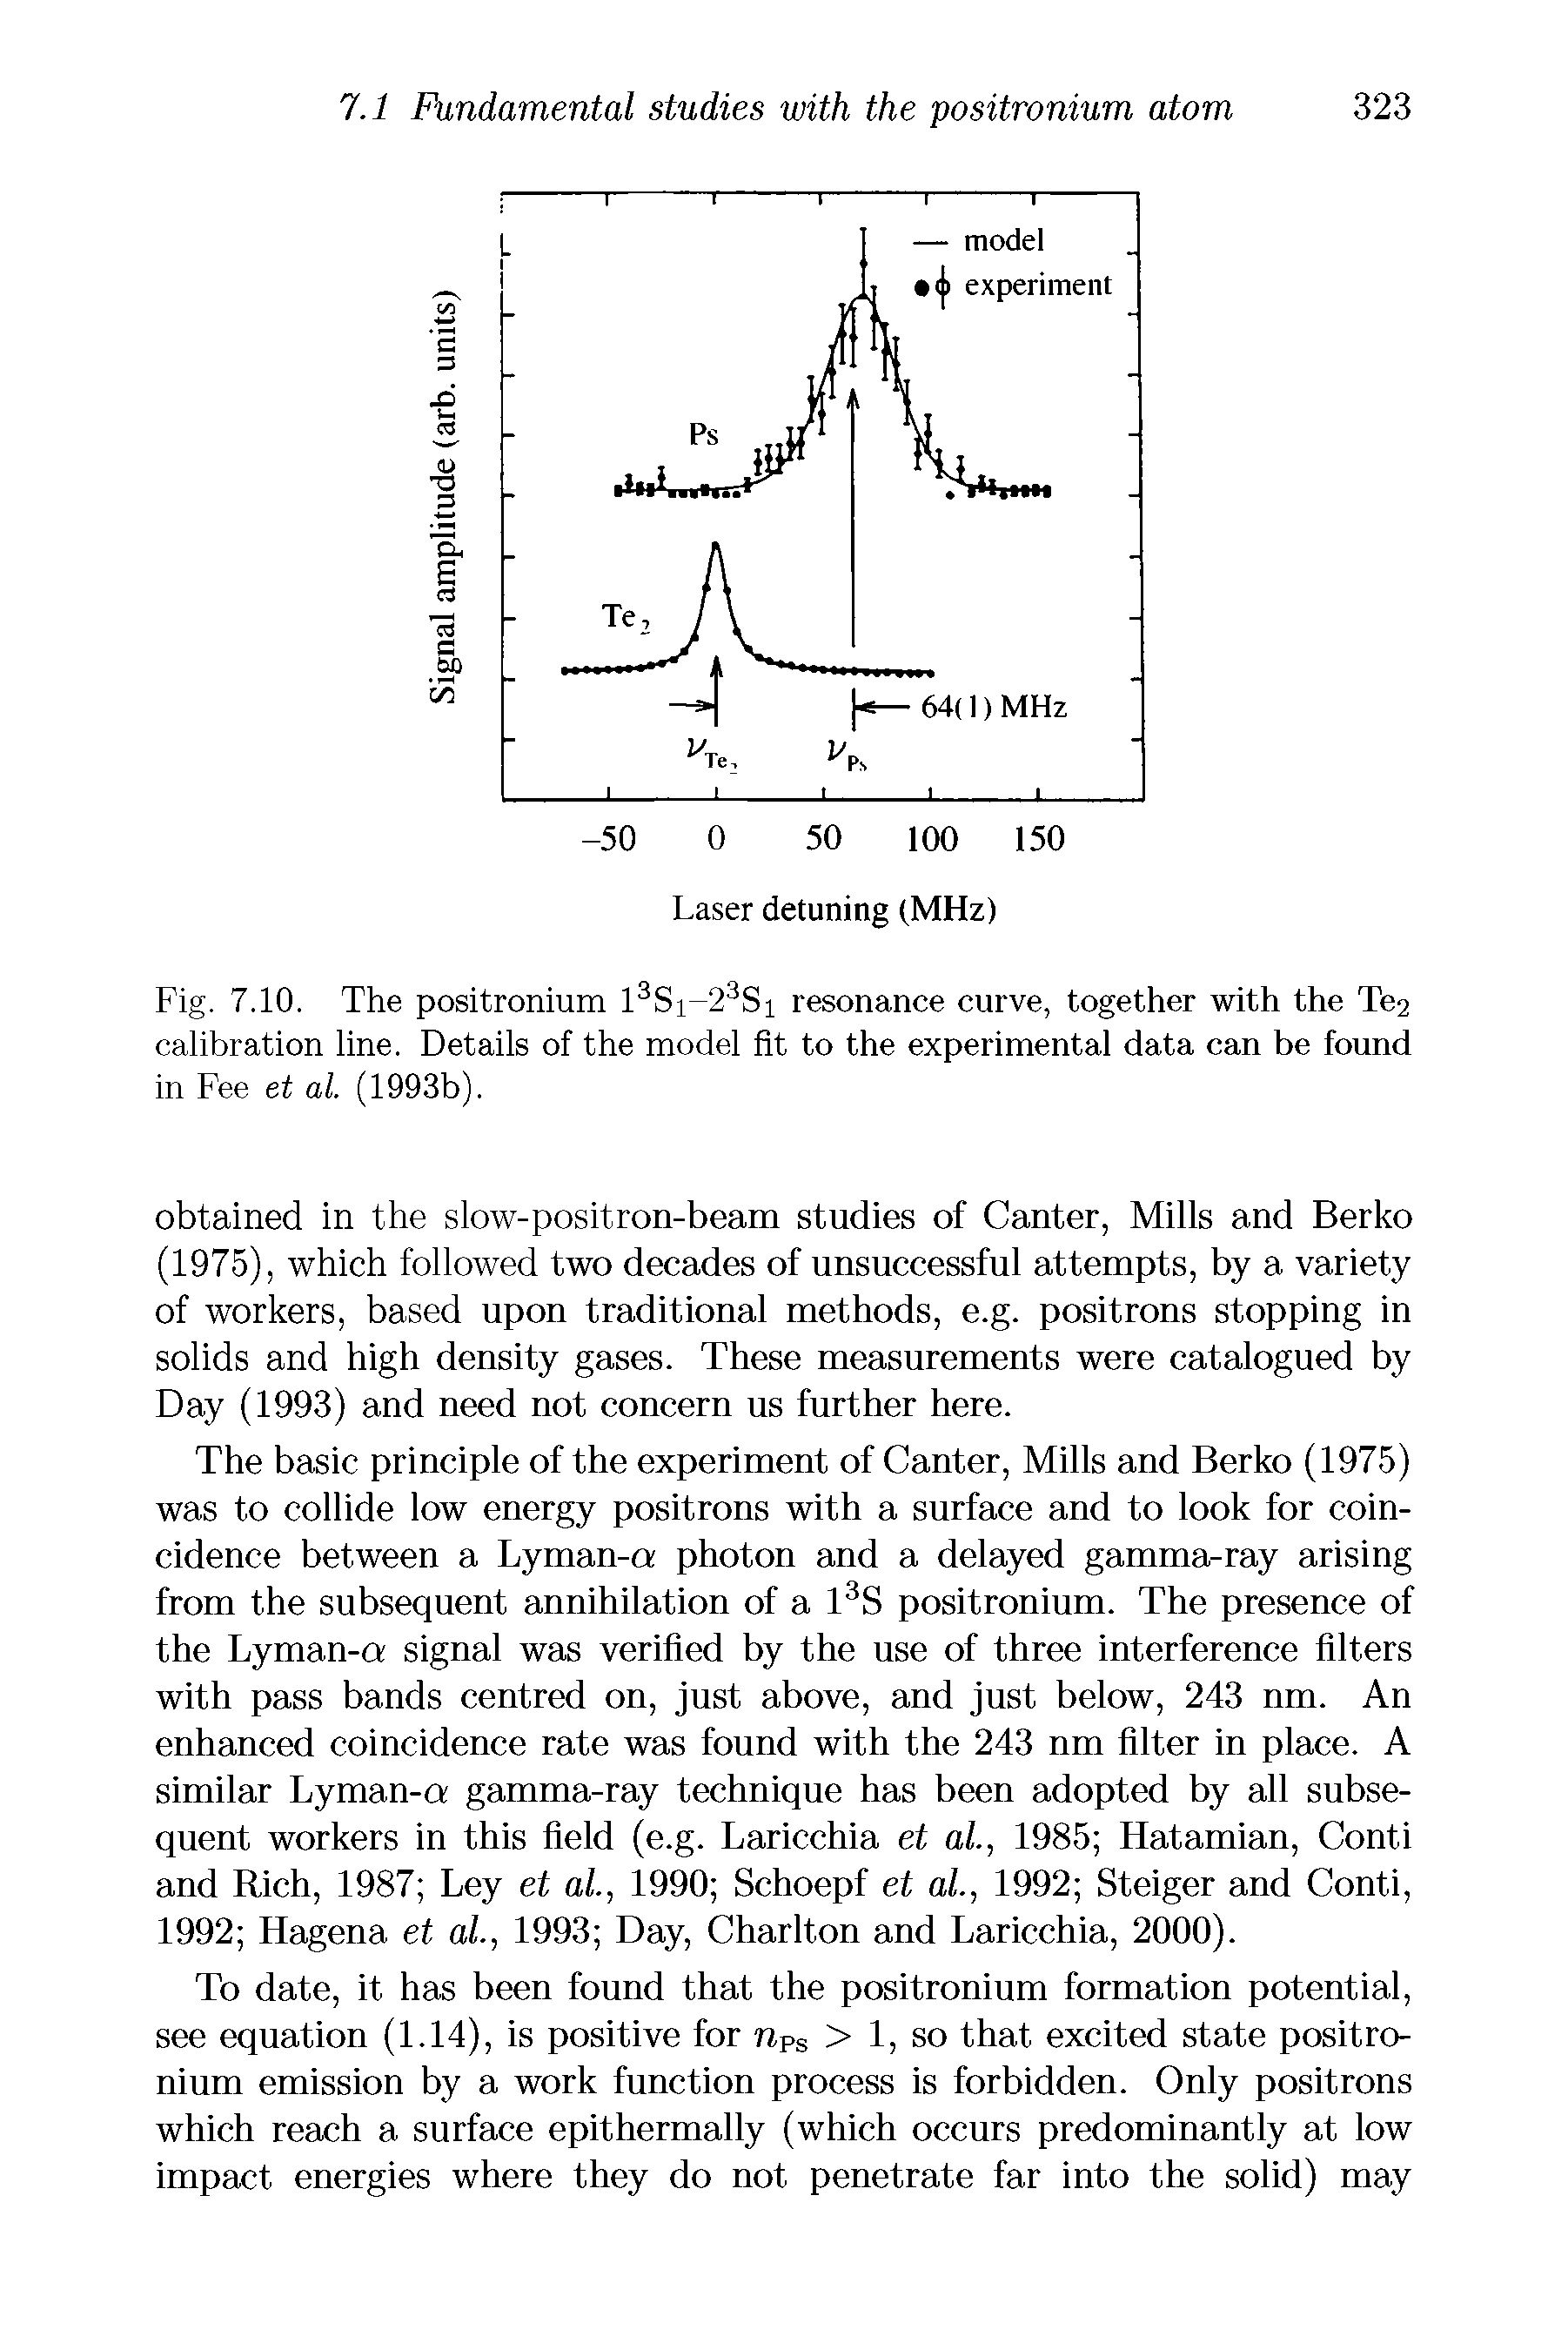 Fig. 7.10. The positronium 13Si-23Si resonance curve, together with the Te2 calibration line. Details of the model fit to the experimental data can be found in Fee et al. (1993b).